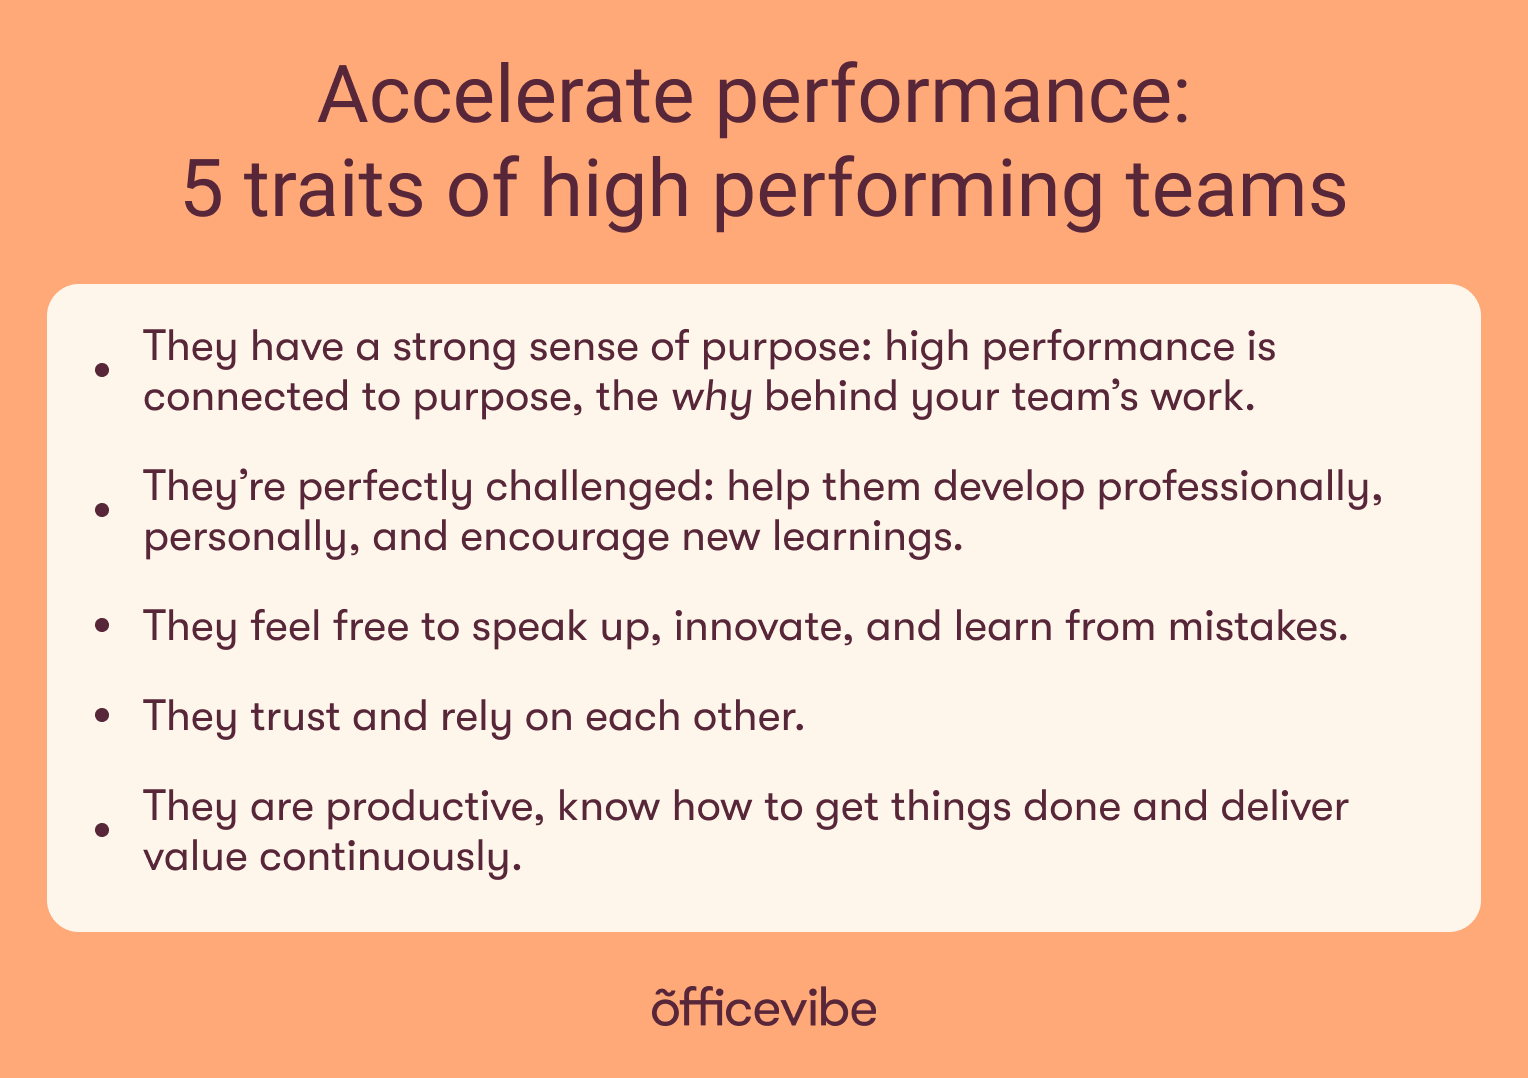 Key points: high performing teams have a sense of purpose, they are challenged, they feel safe to speak up and to make mistakes, they trust and rely on each other, they are productive.